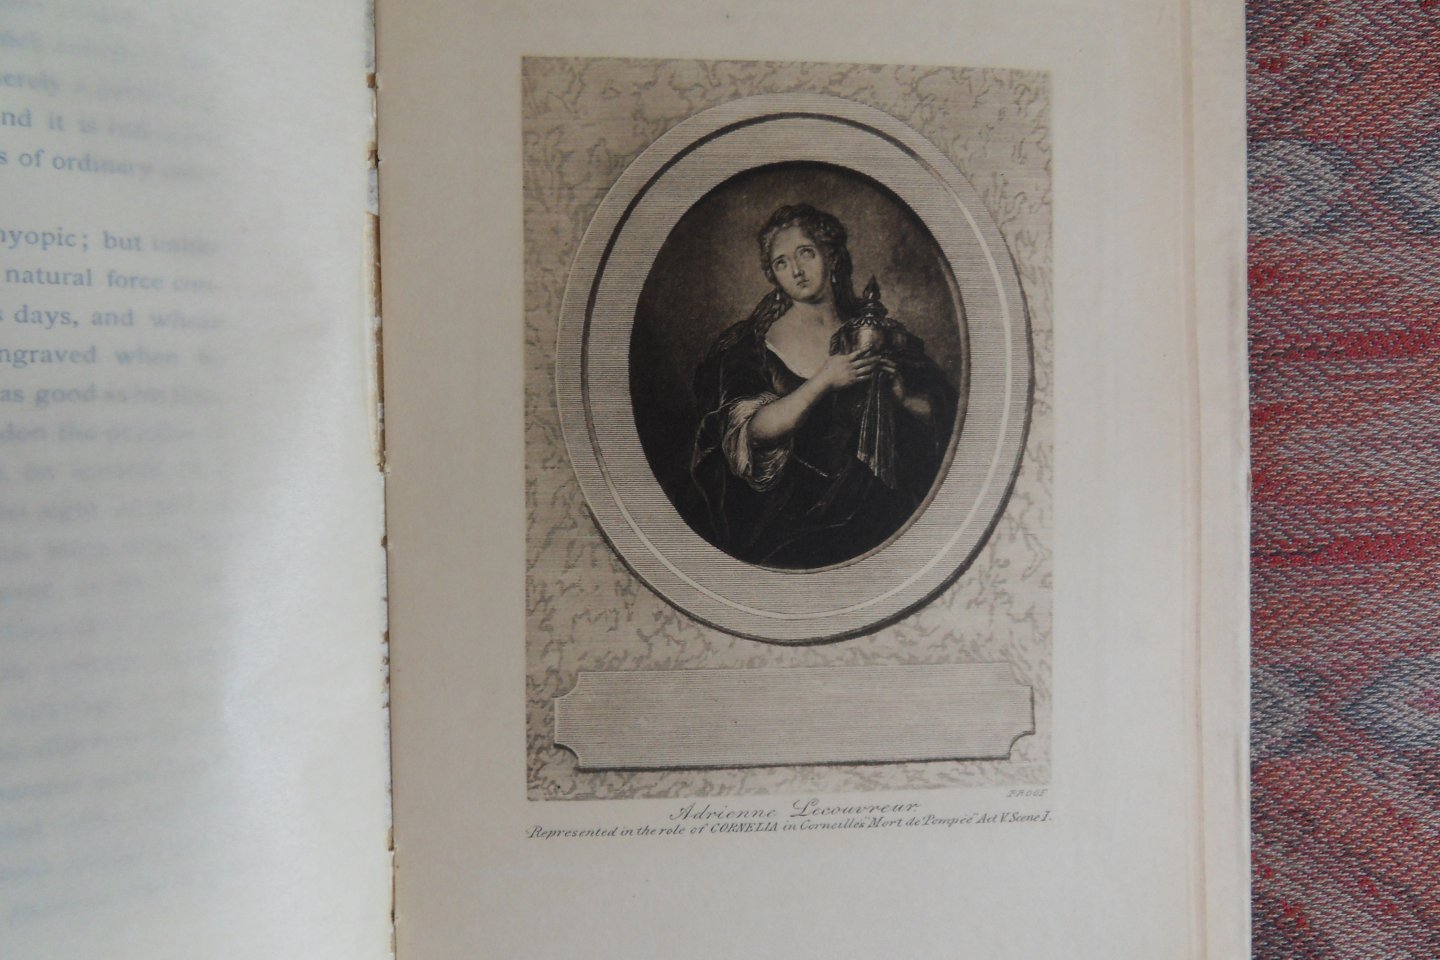 Andrews, W.L. - A Trio of Eighteenth Century French Engravers of Portraits in Minature. - Ficquet, Savart, Grateloup.